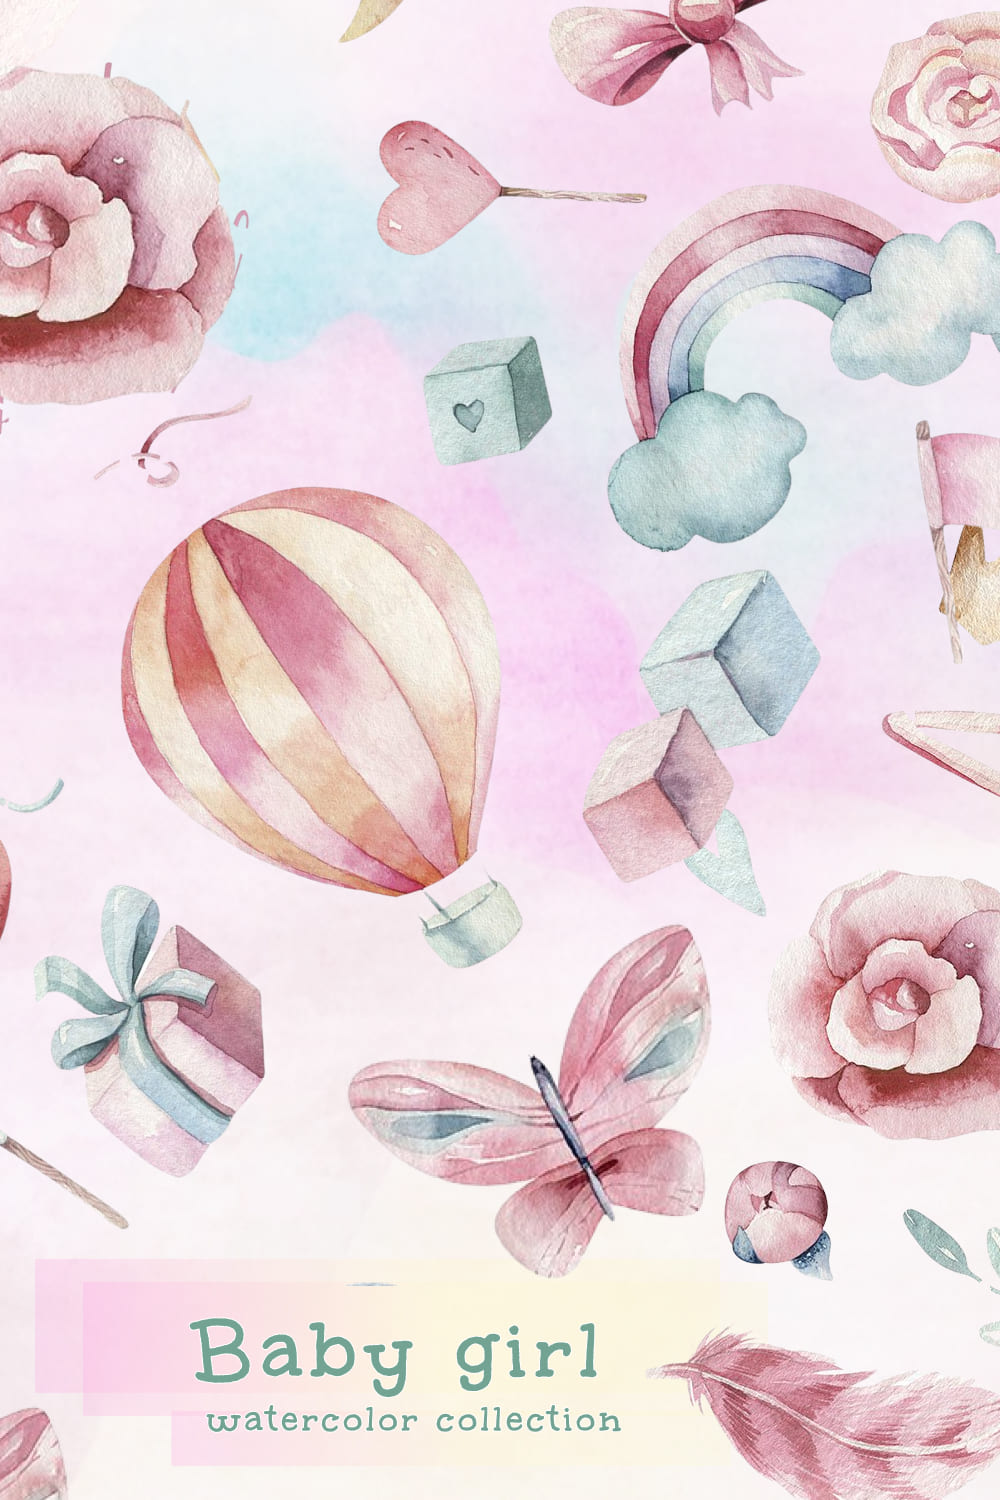 Baby Girl Watercolor Collection - Pinterest Image Preview.